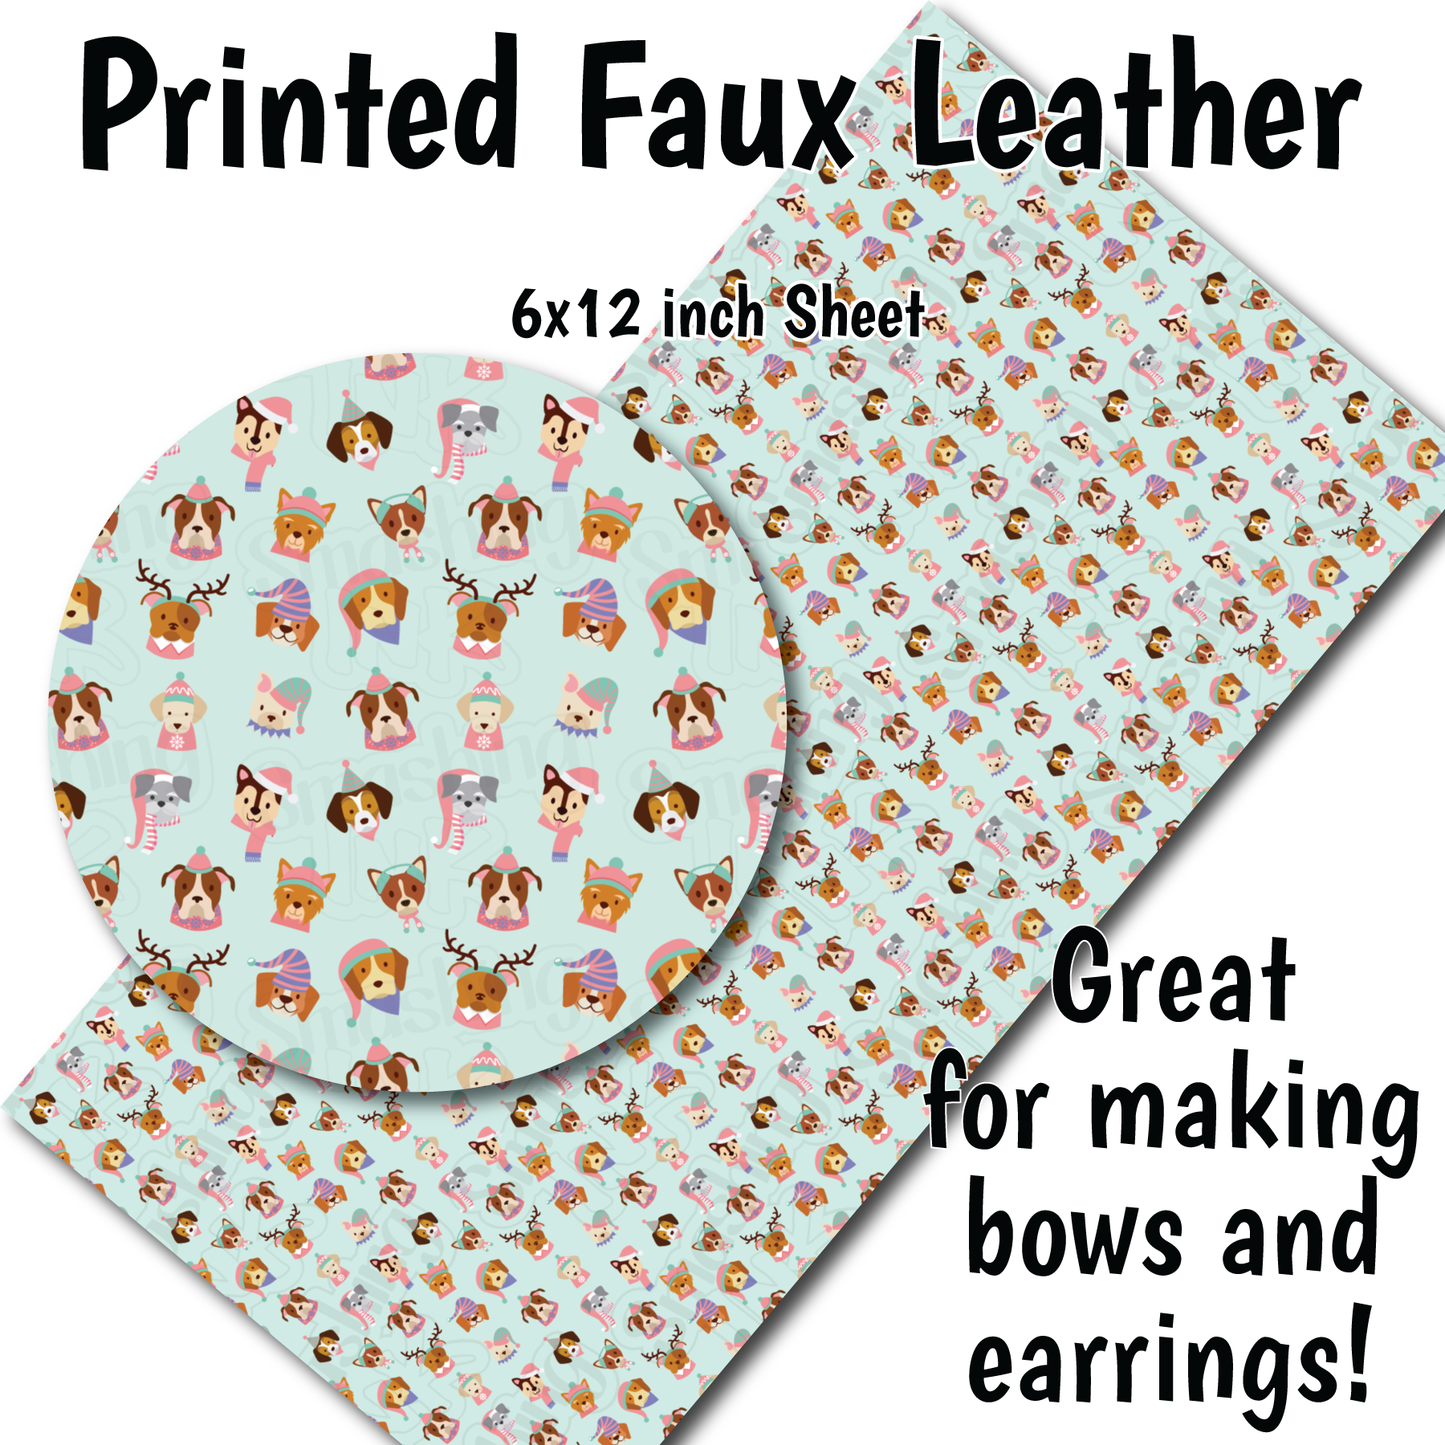 Christmas Puppies O - Faux Leather Sheet (SHIPS IN 3 BUS DAYS)